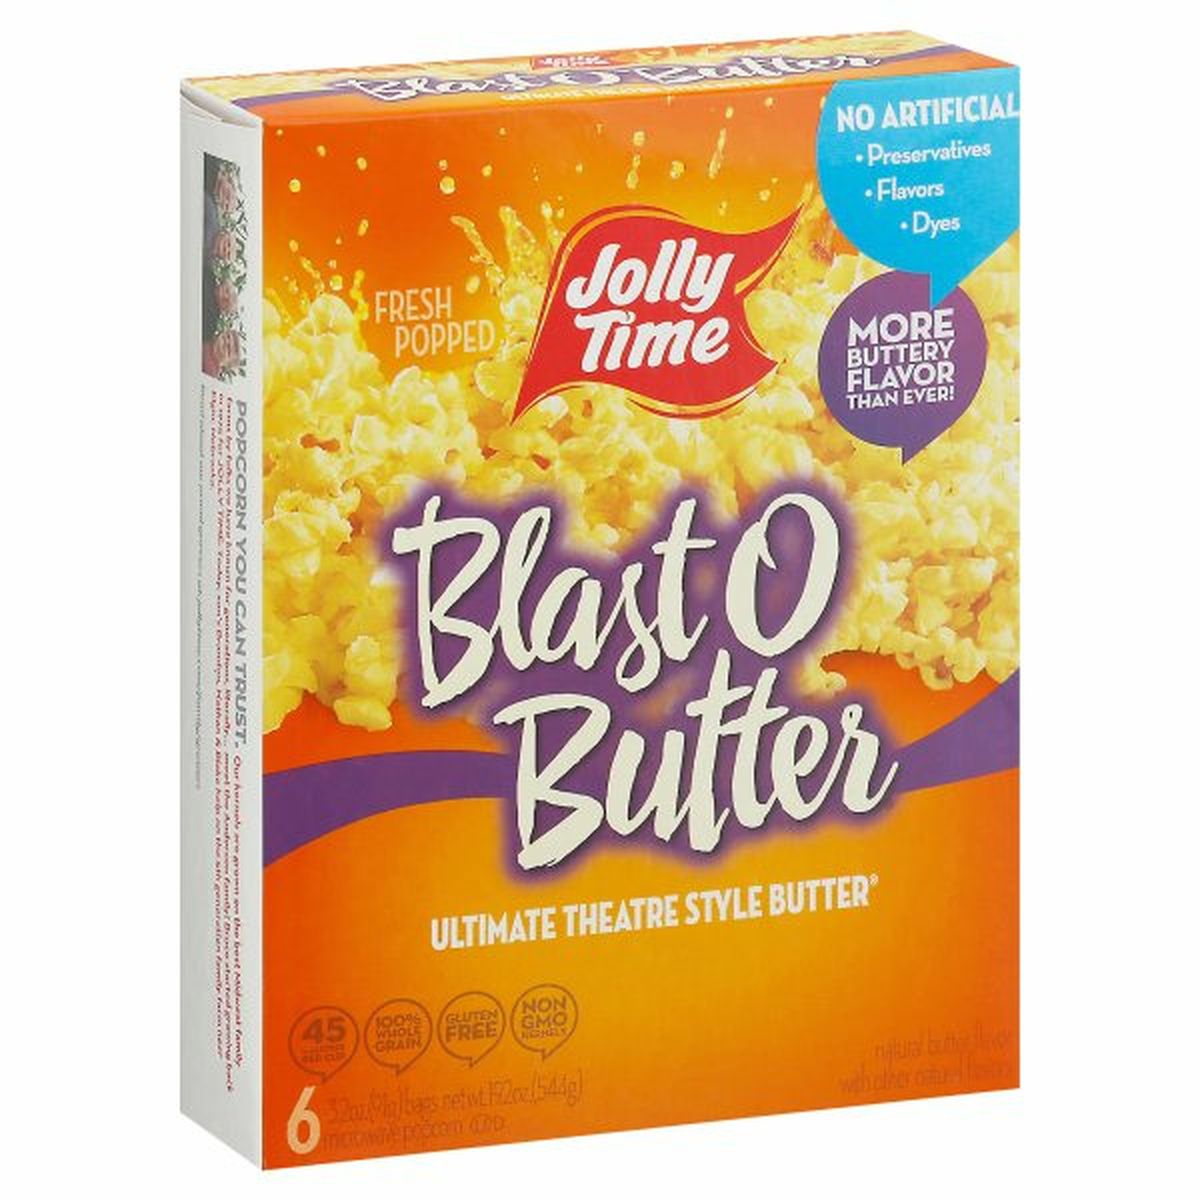 Calories in JOLLY TIME Microwave Popcorn, Blast O Butter